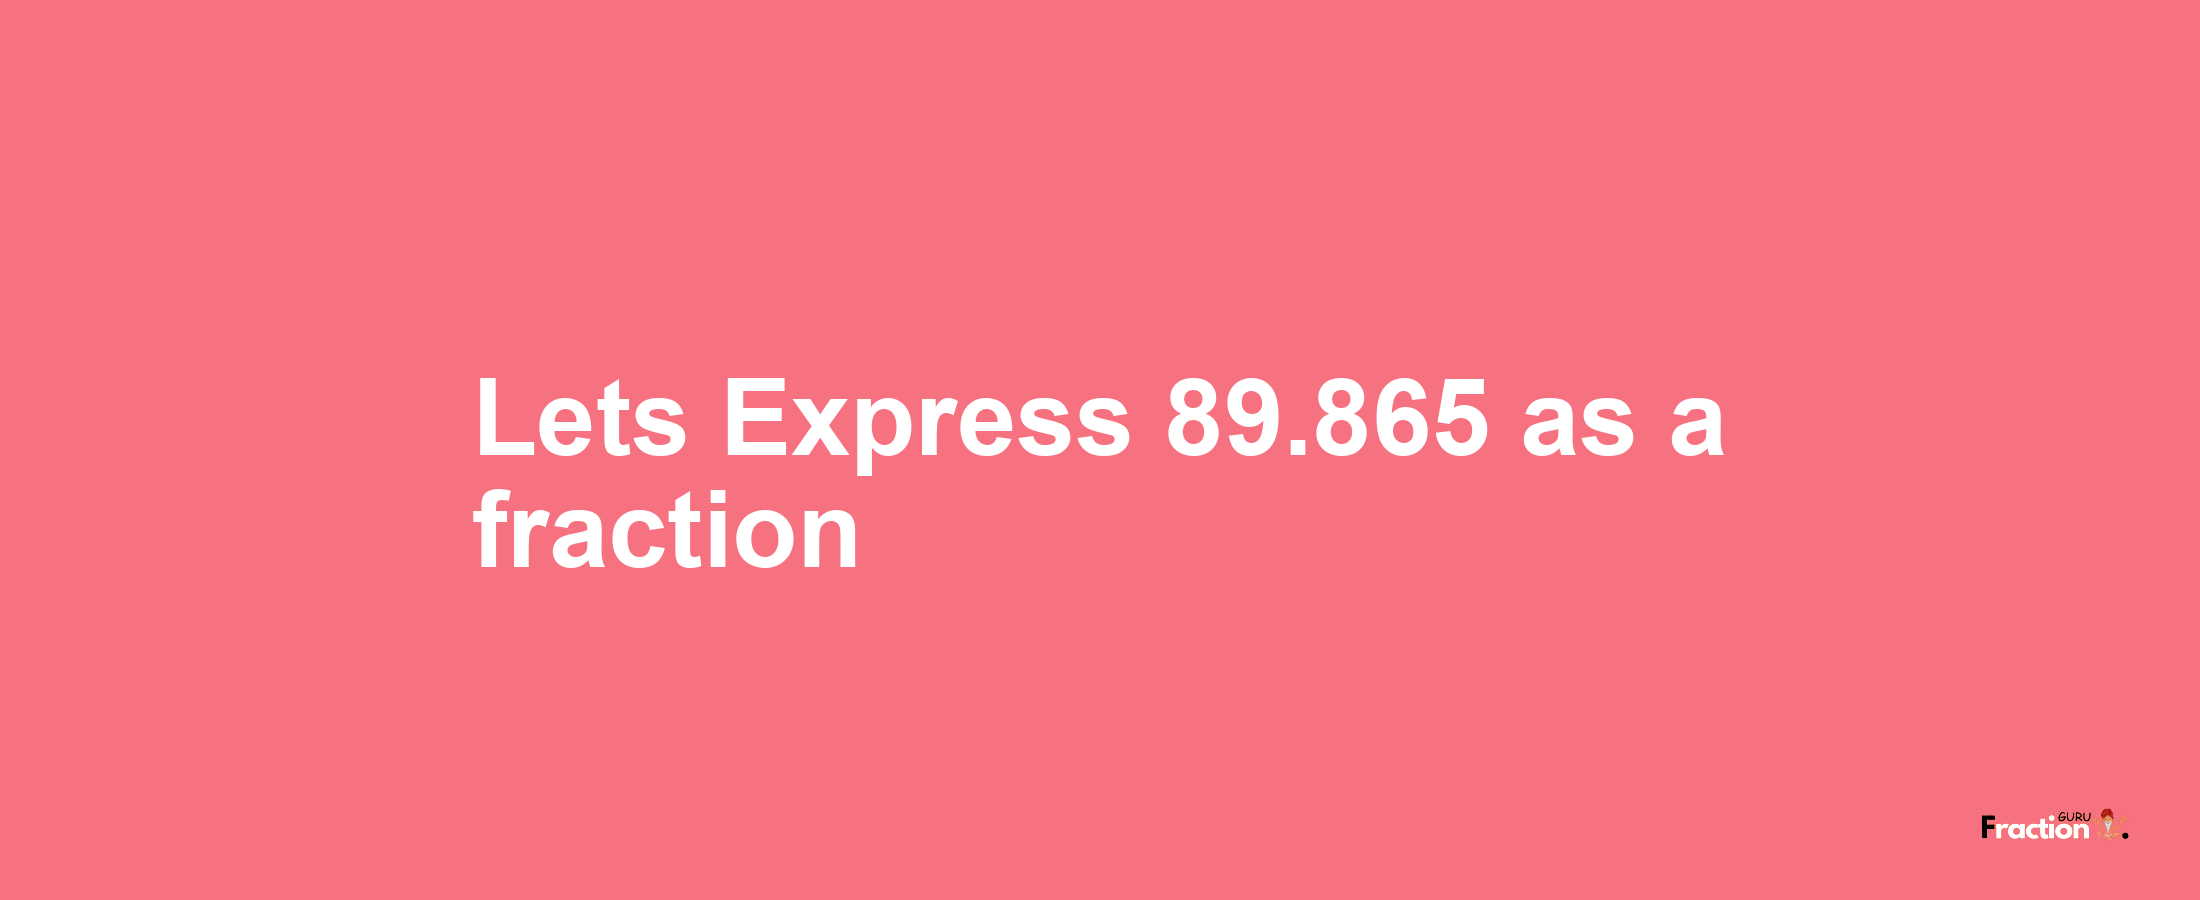 Lets Express 89.865 as afraction